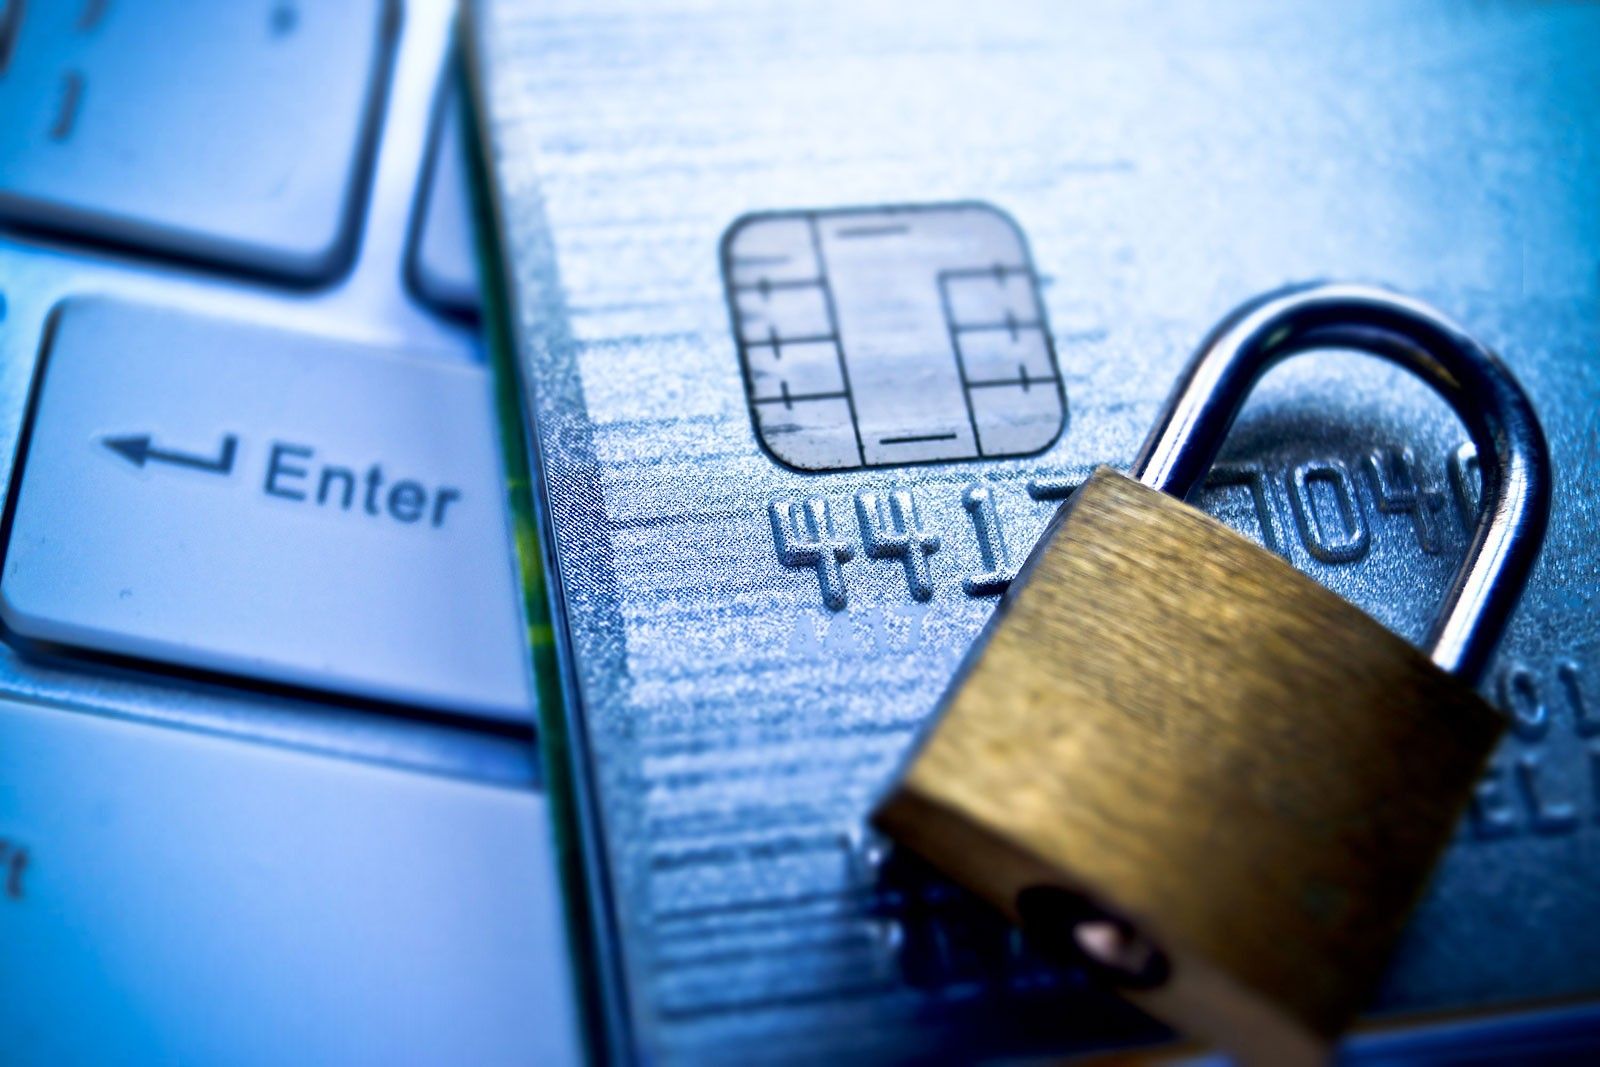 WebHotelier compliant for 6th year in a row, adopts PCI DSS 3.2